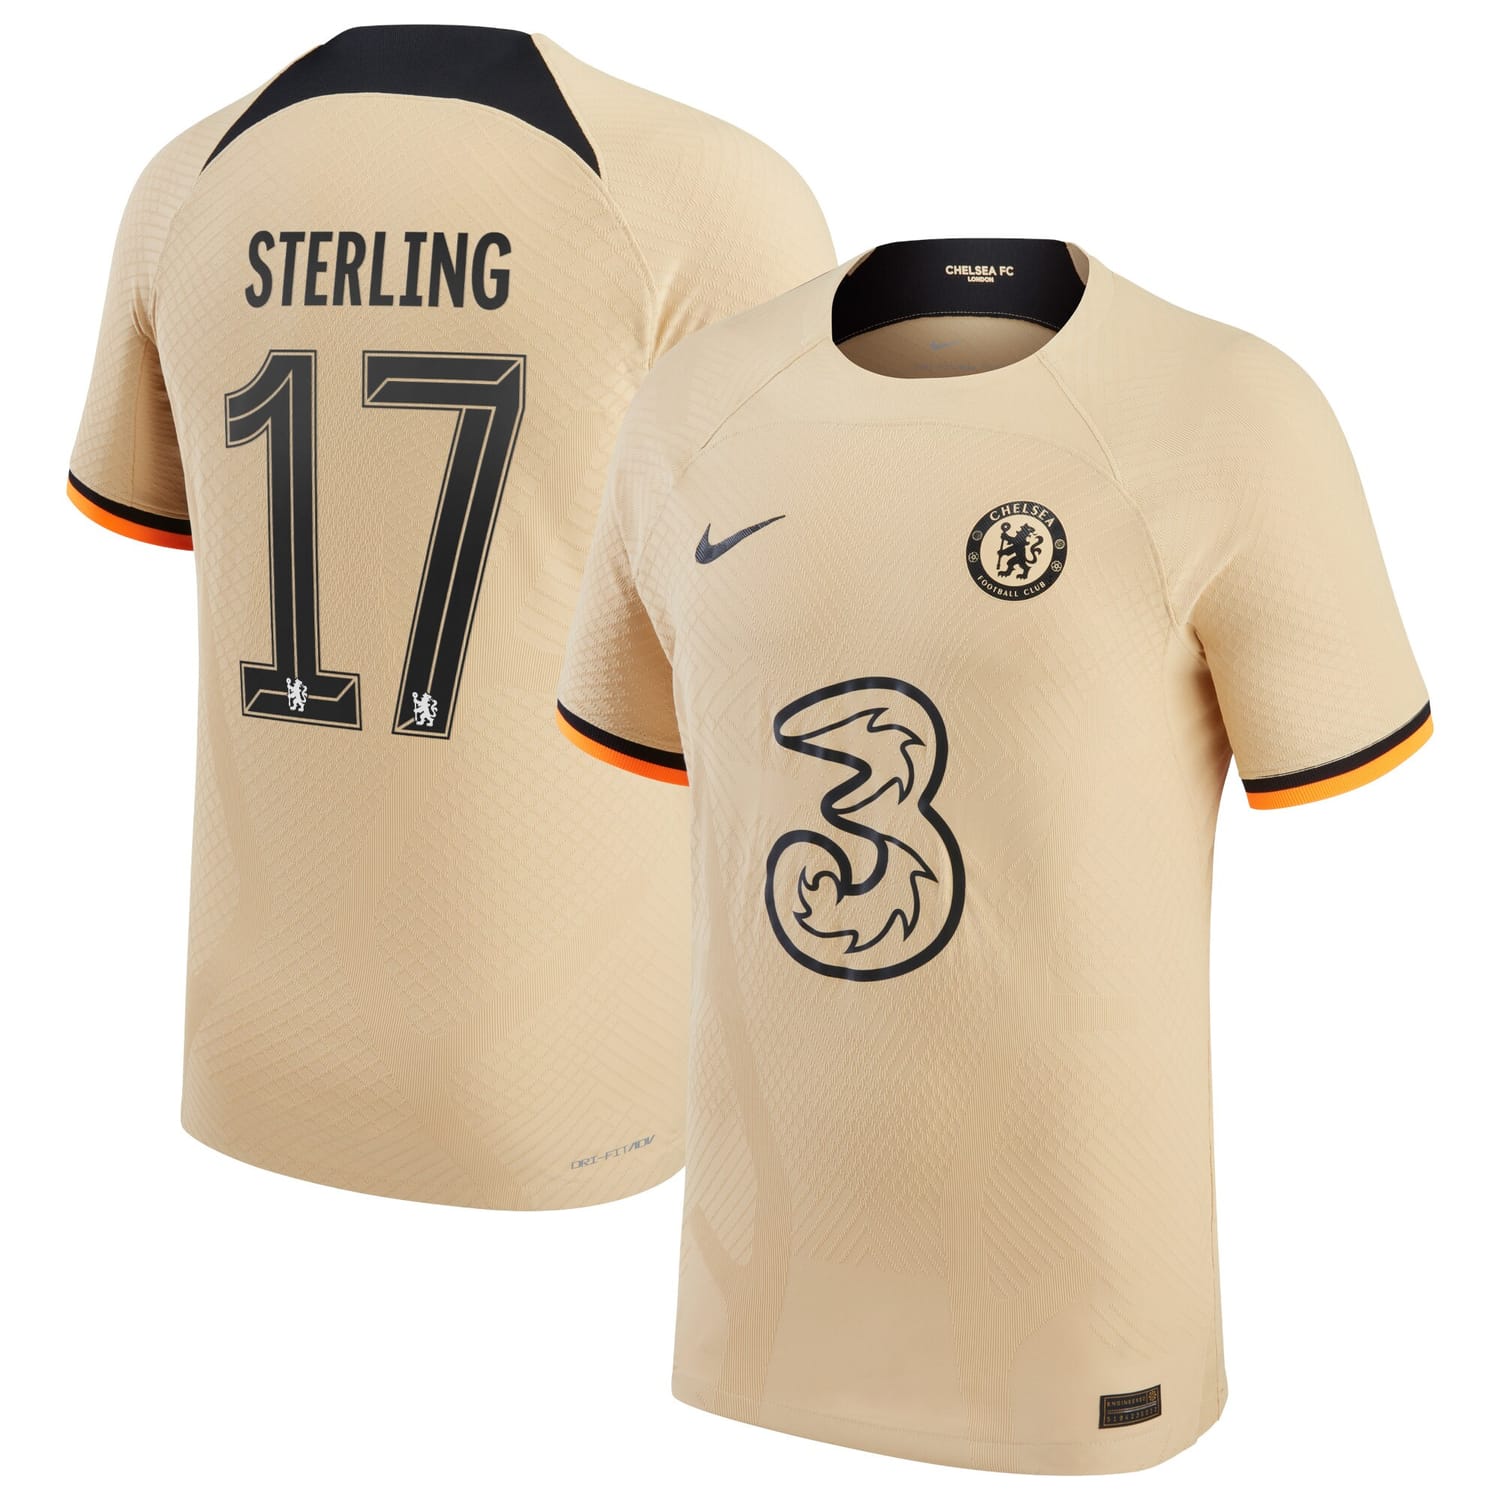 Premier League Chelsea Third Cup Authentic Jersey Shirt 2022-23 player Raheem Sterling 17 printing for Men